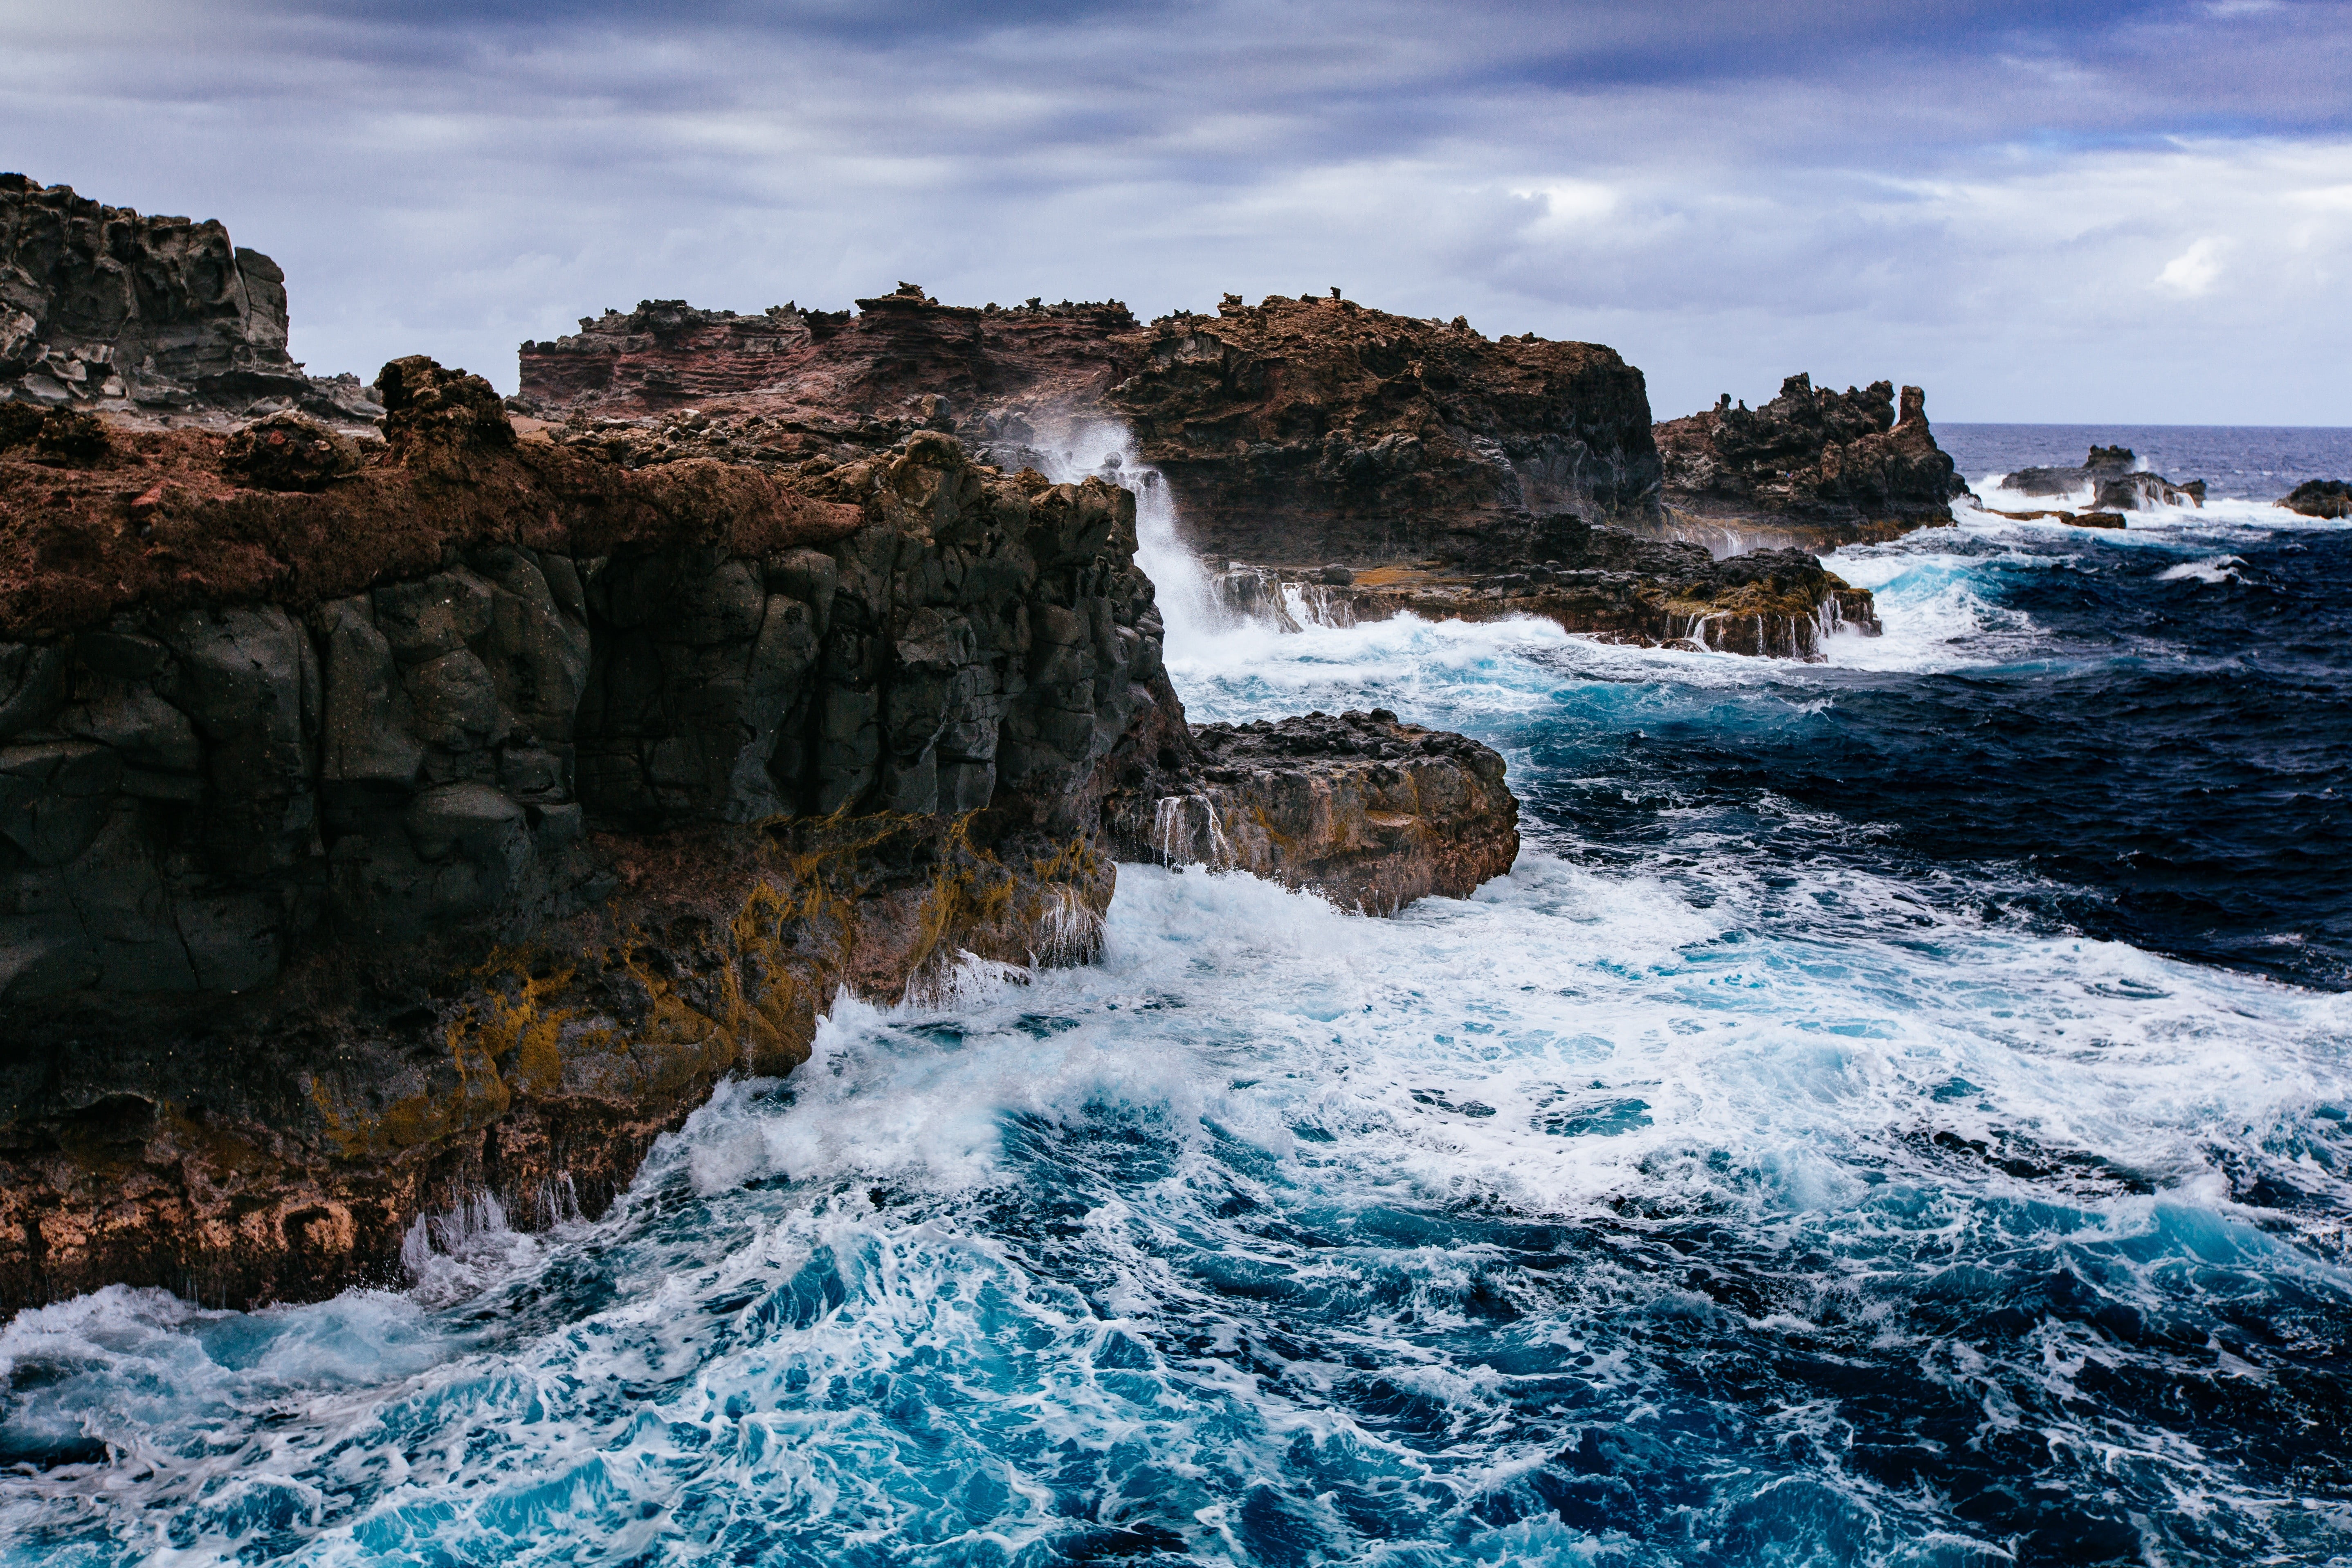 cliff, sea, waves, clouds, nature, HDR, water, rock, rock - object